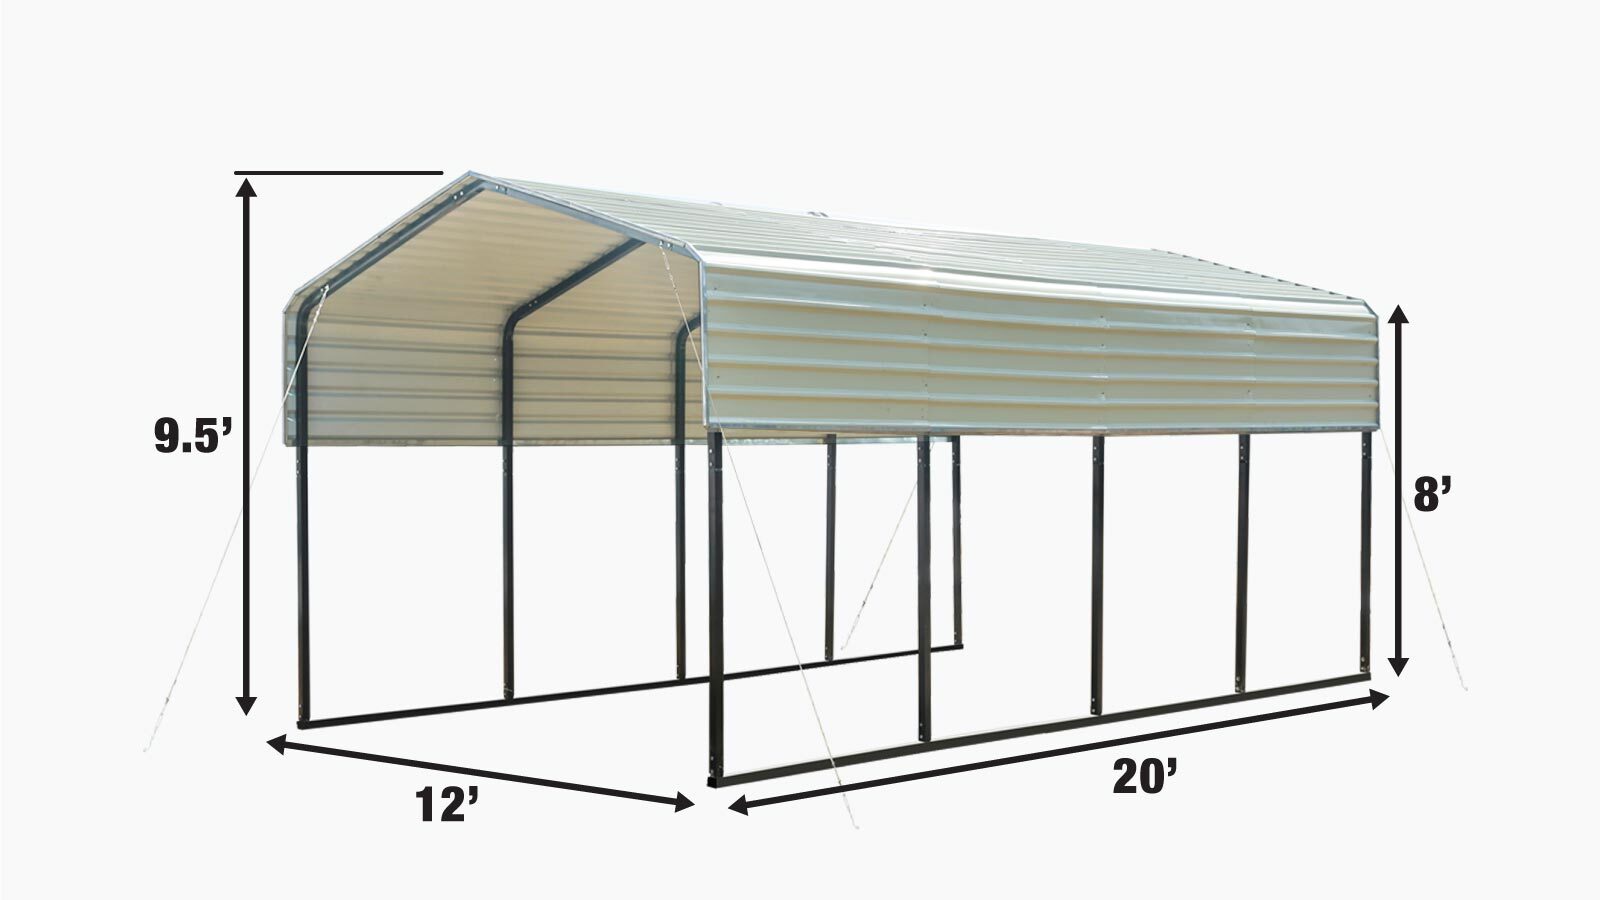 TMG Industrial 12’ x 20’ All-Steel Carport w/Open Sidewalls, Galvanized Roof, Powder Coated, Polyester Paint Coating, Stabilizing Cables, TMG-CP1220-specifications-image